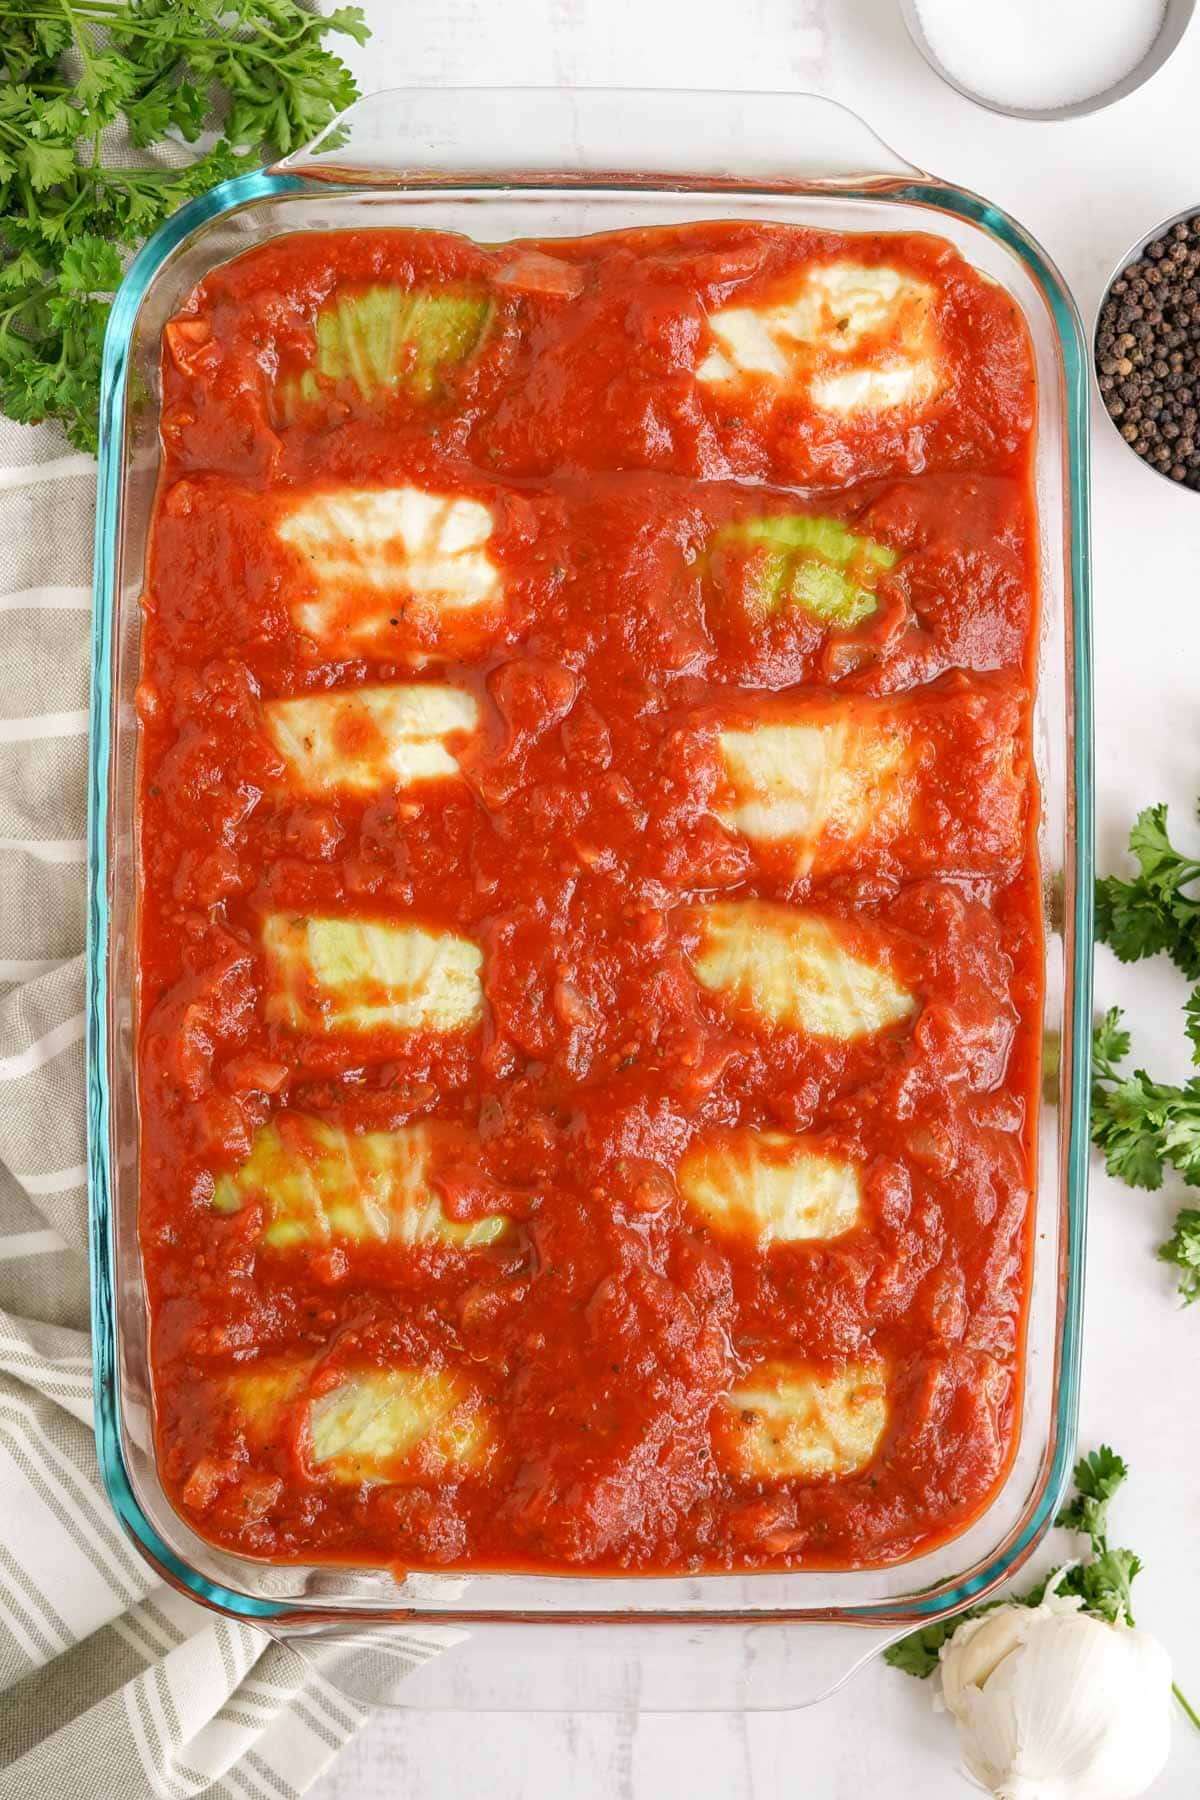 baking dish with rolled up cabbage and tomatoe sauce